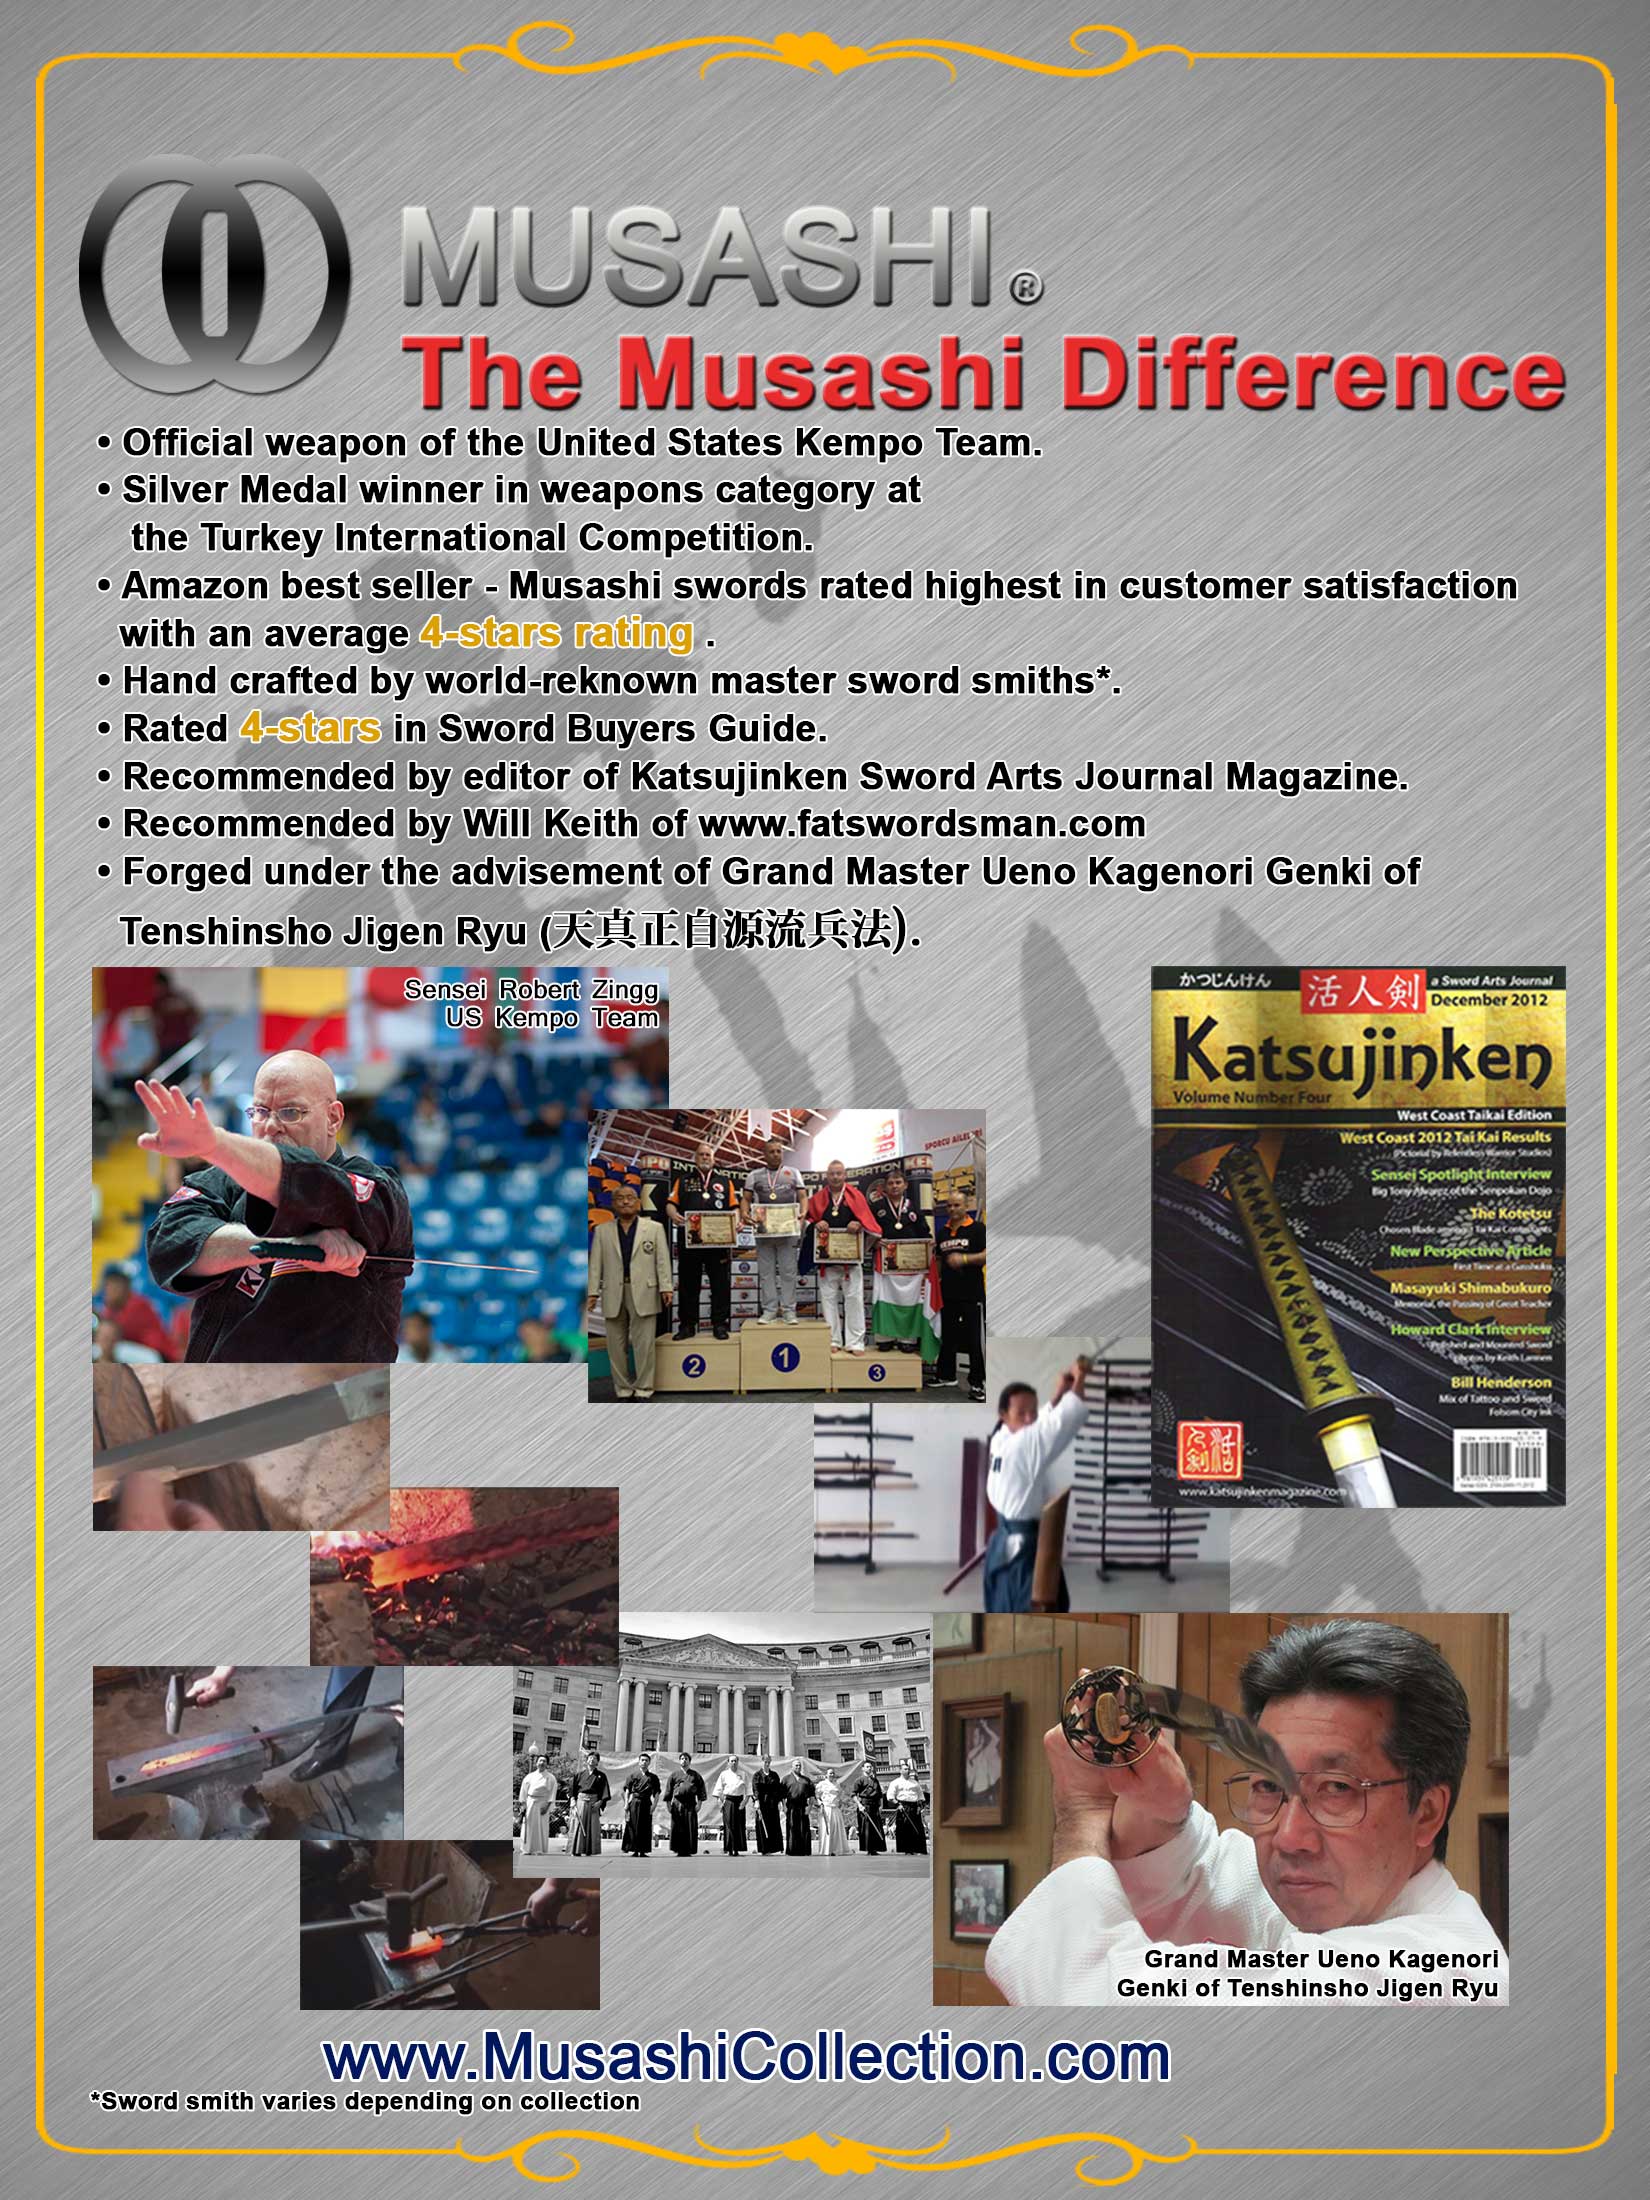 The Musashi Difference